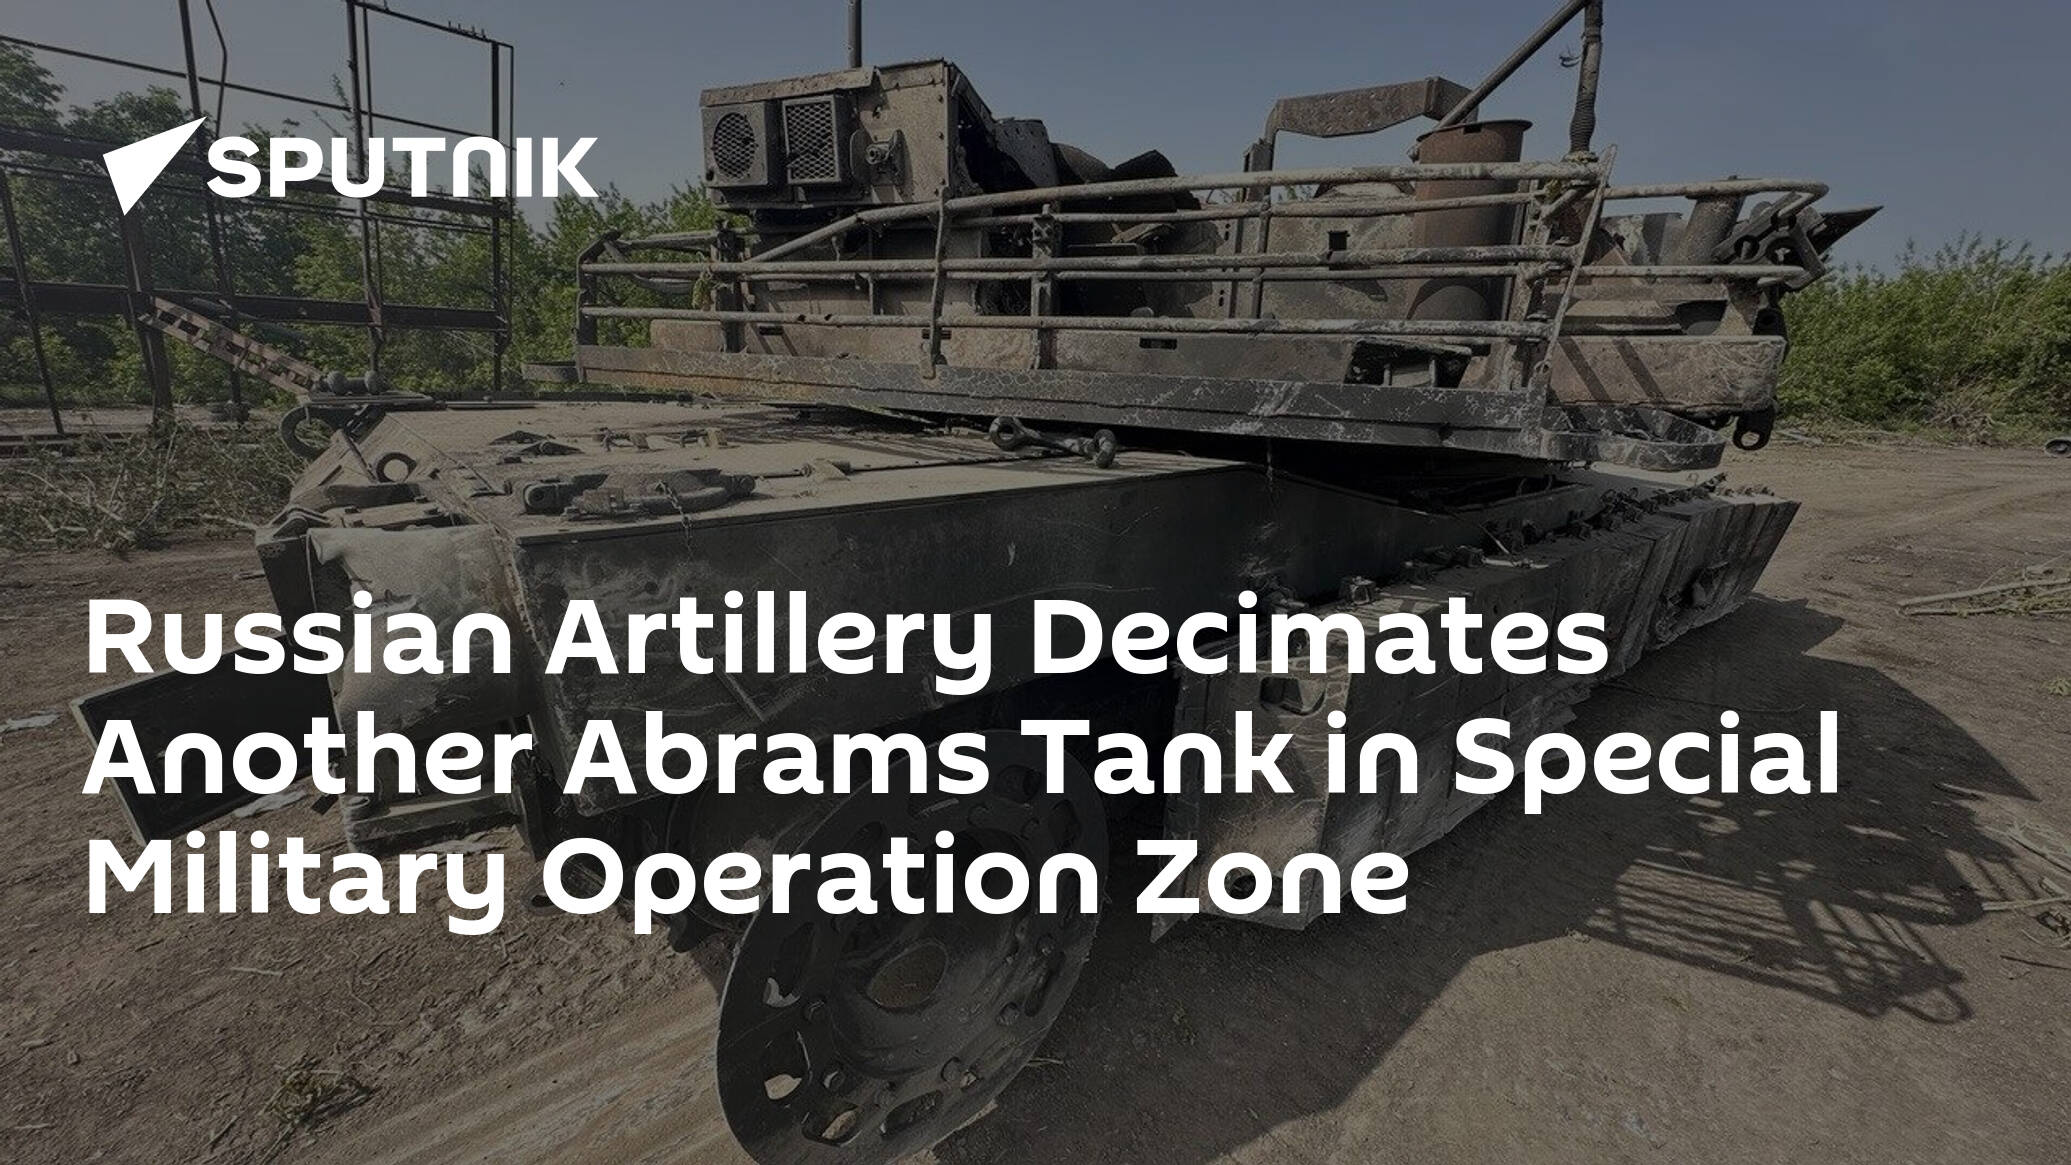 Russian Artillery Decimates Another Abrams Tank in Special Military Operation Zone